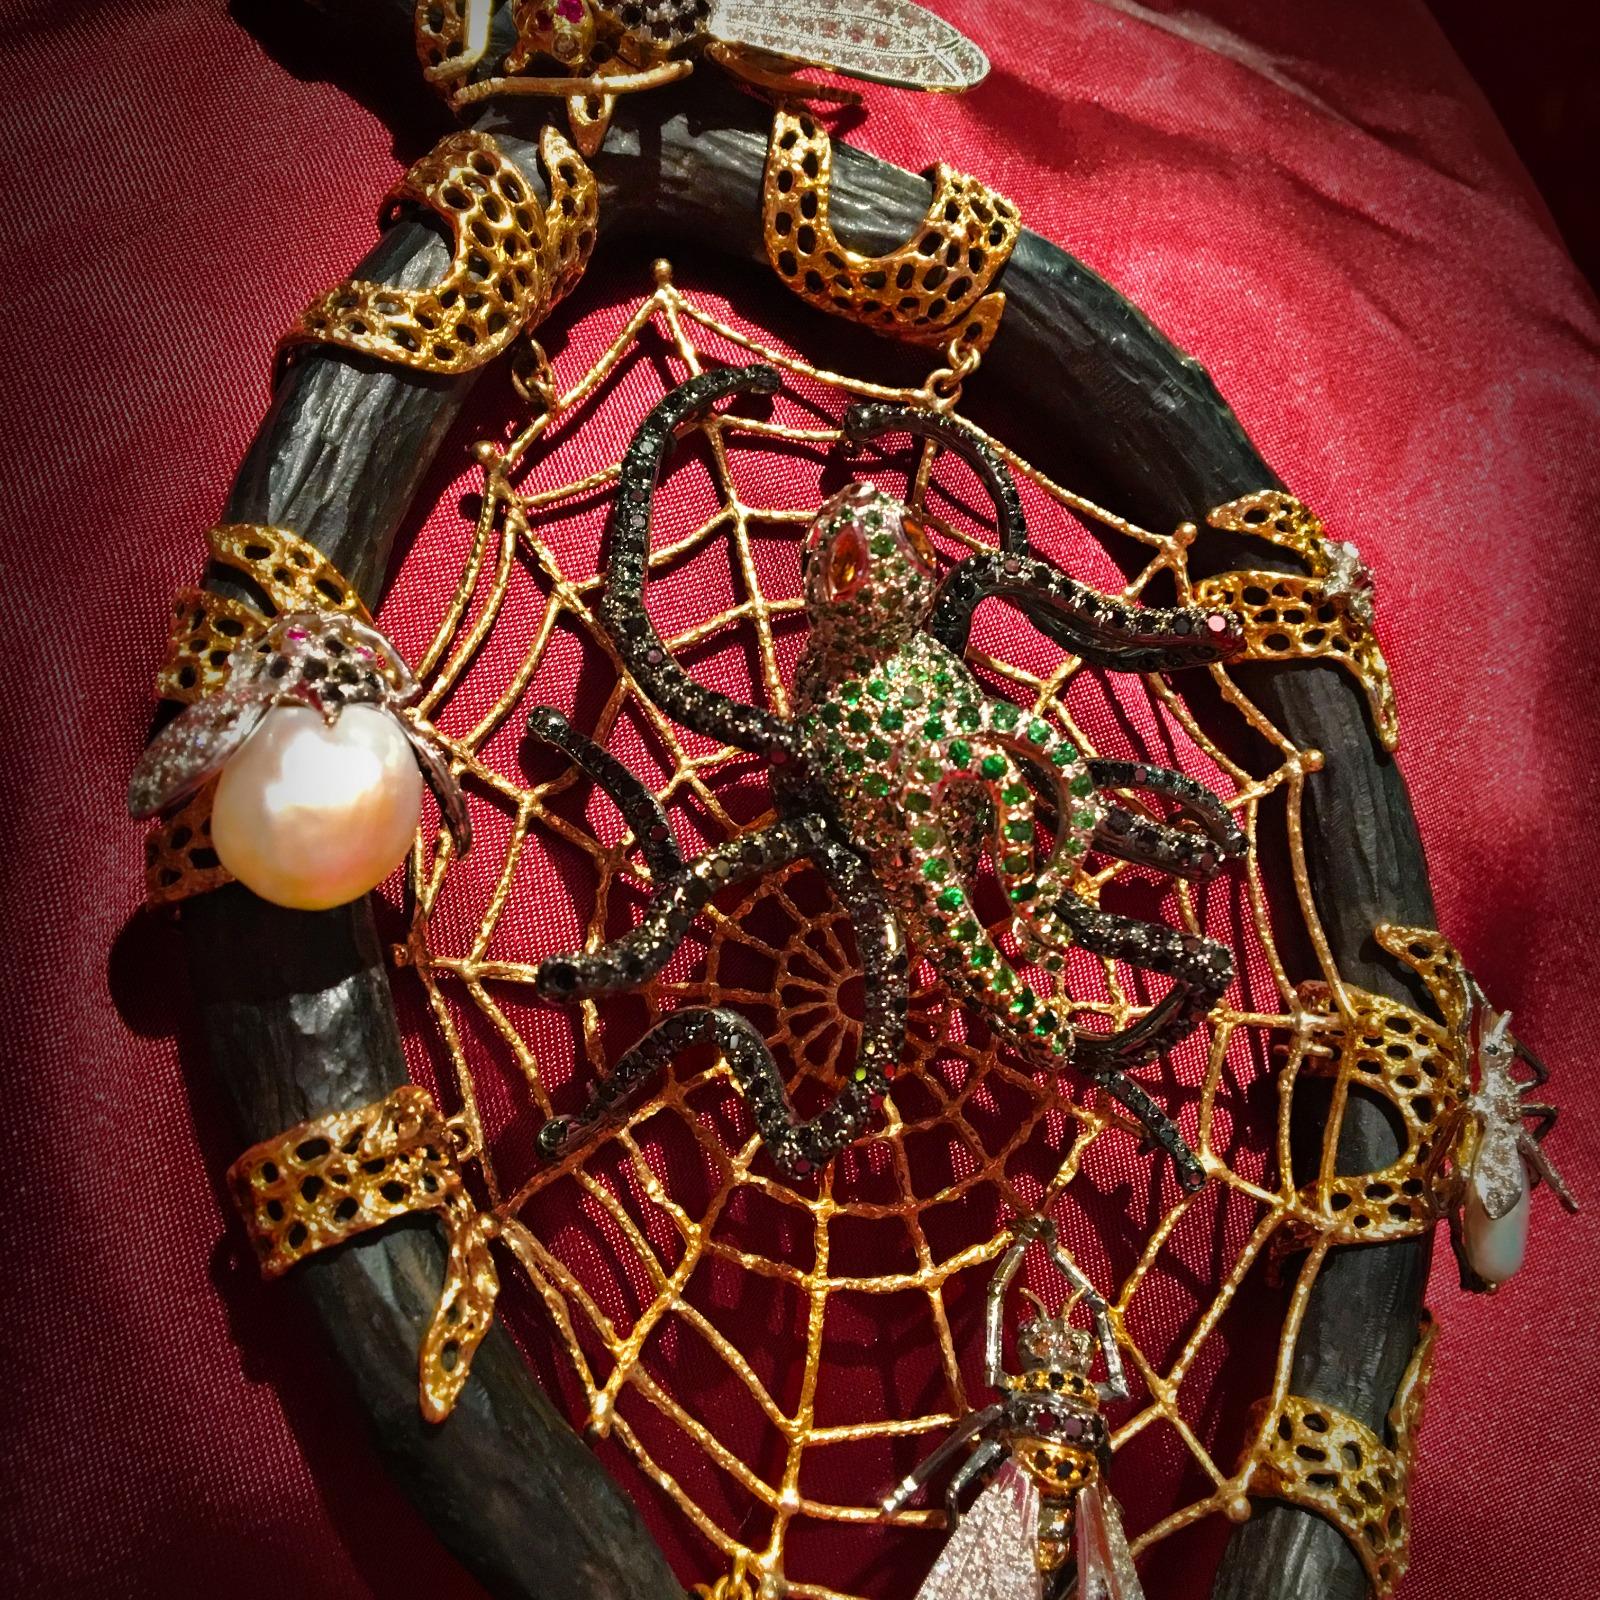 Experience the allure of a truly rare and extraordinary piece hand made by Andrea Ghelli. The necklace is a mix of mystery, nature and magic, an expression of Andrea Ghelli's exceptional craftsmanship and artistic vision. The necklace is made of 18